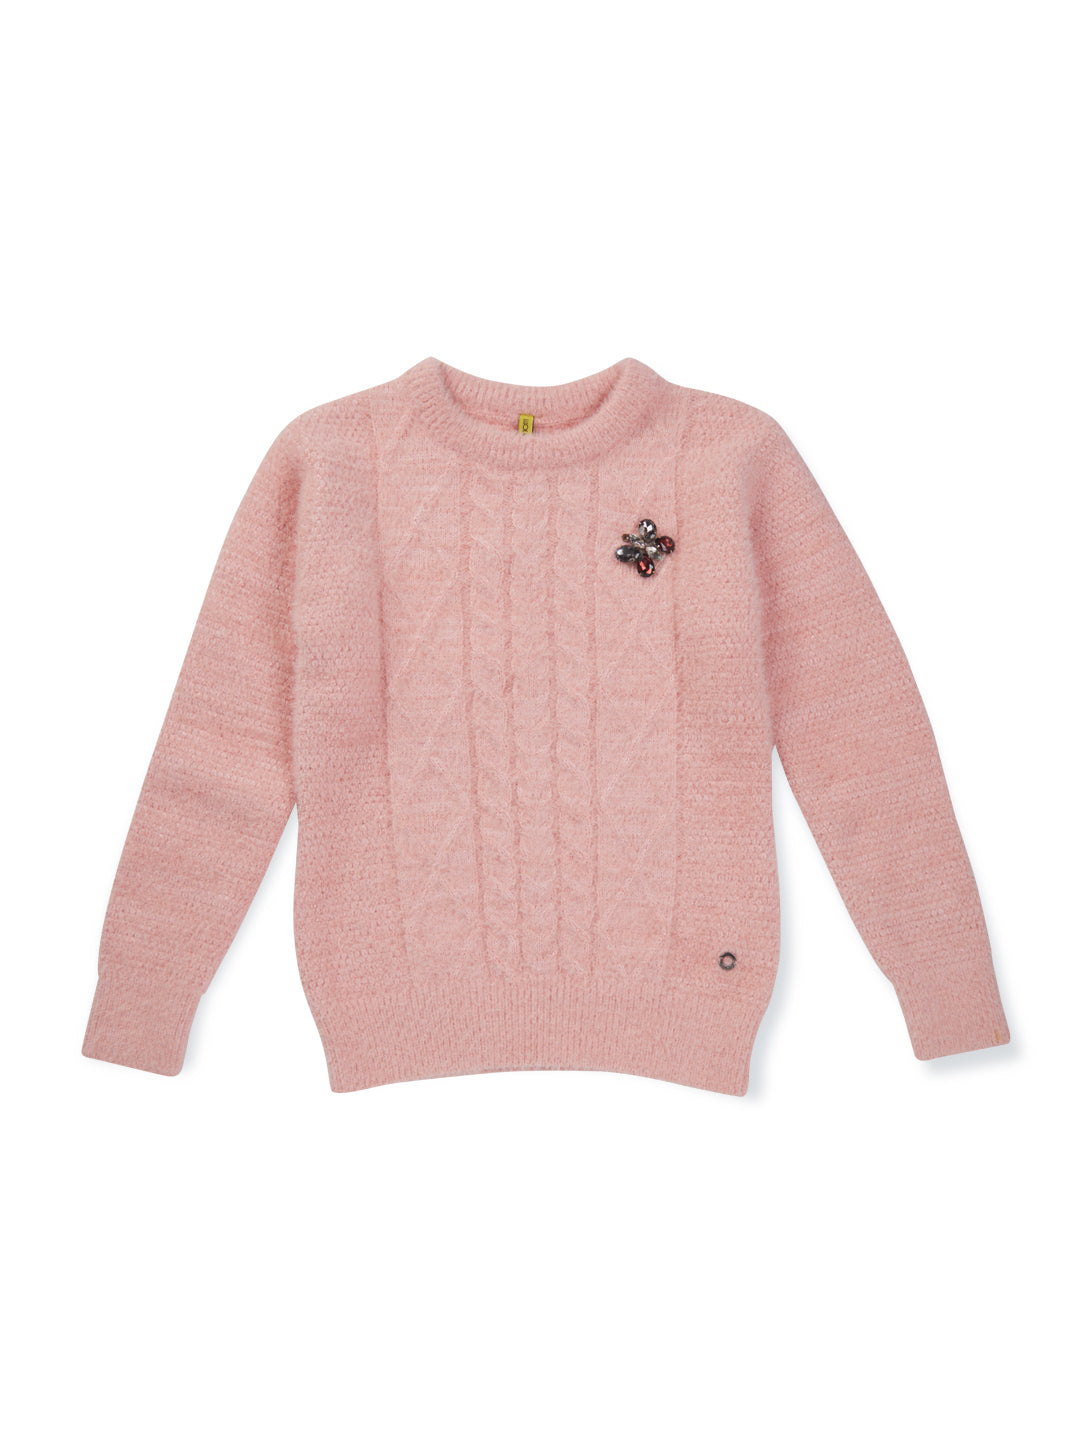 Girls Peach Solid Woven Sweater